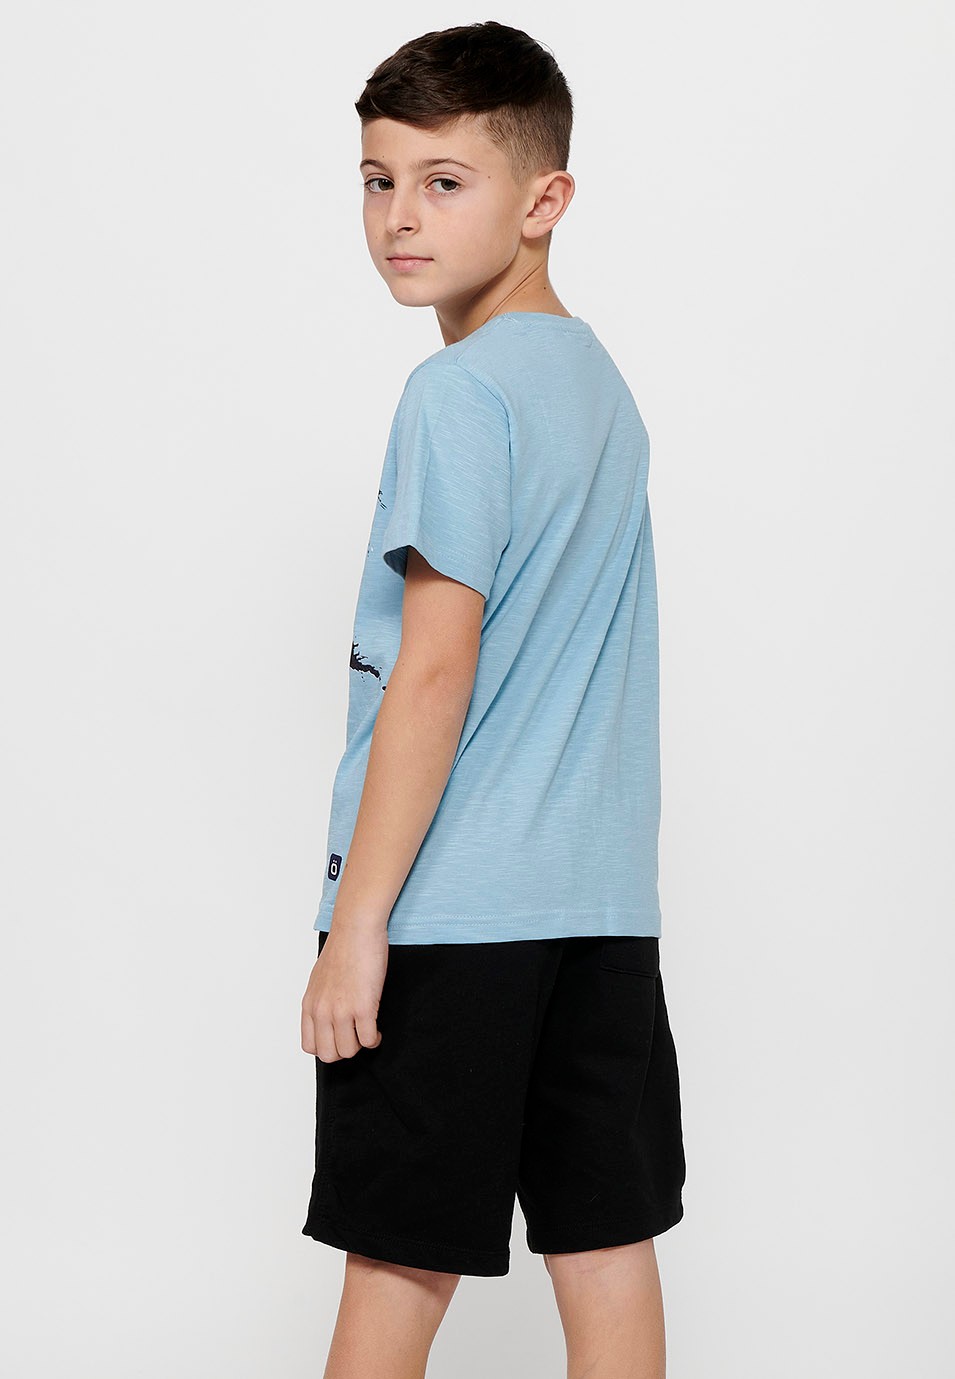 Short-sleeved cotton T-shirt with a round neckline. Front print Color Light blue for Boys 4